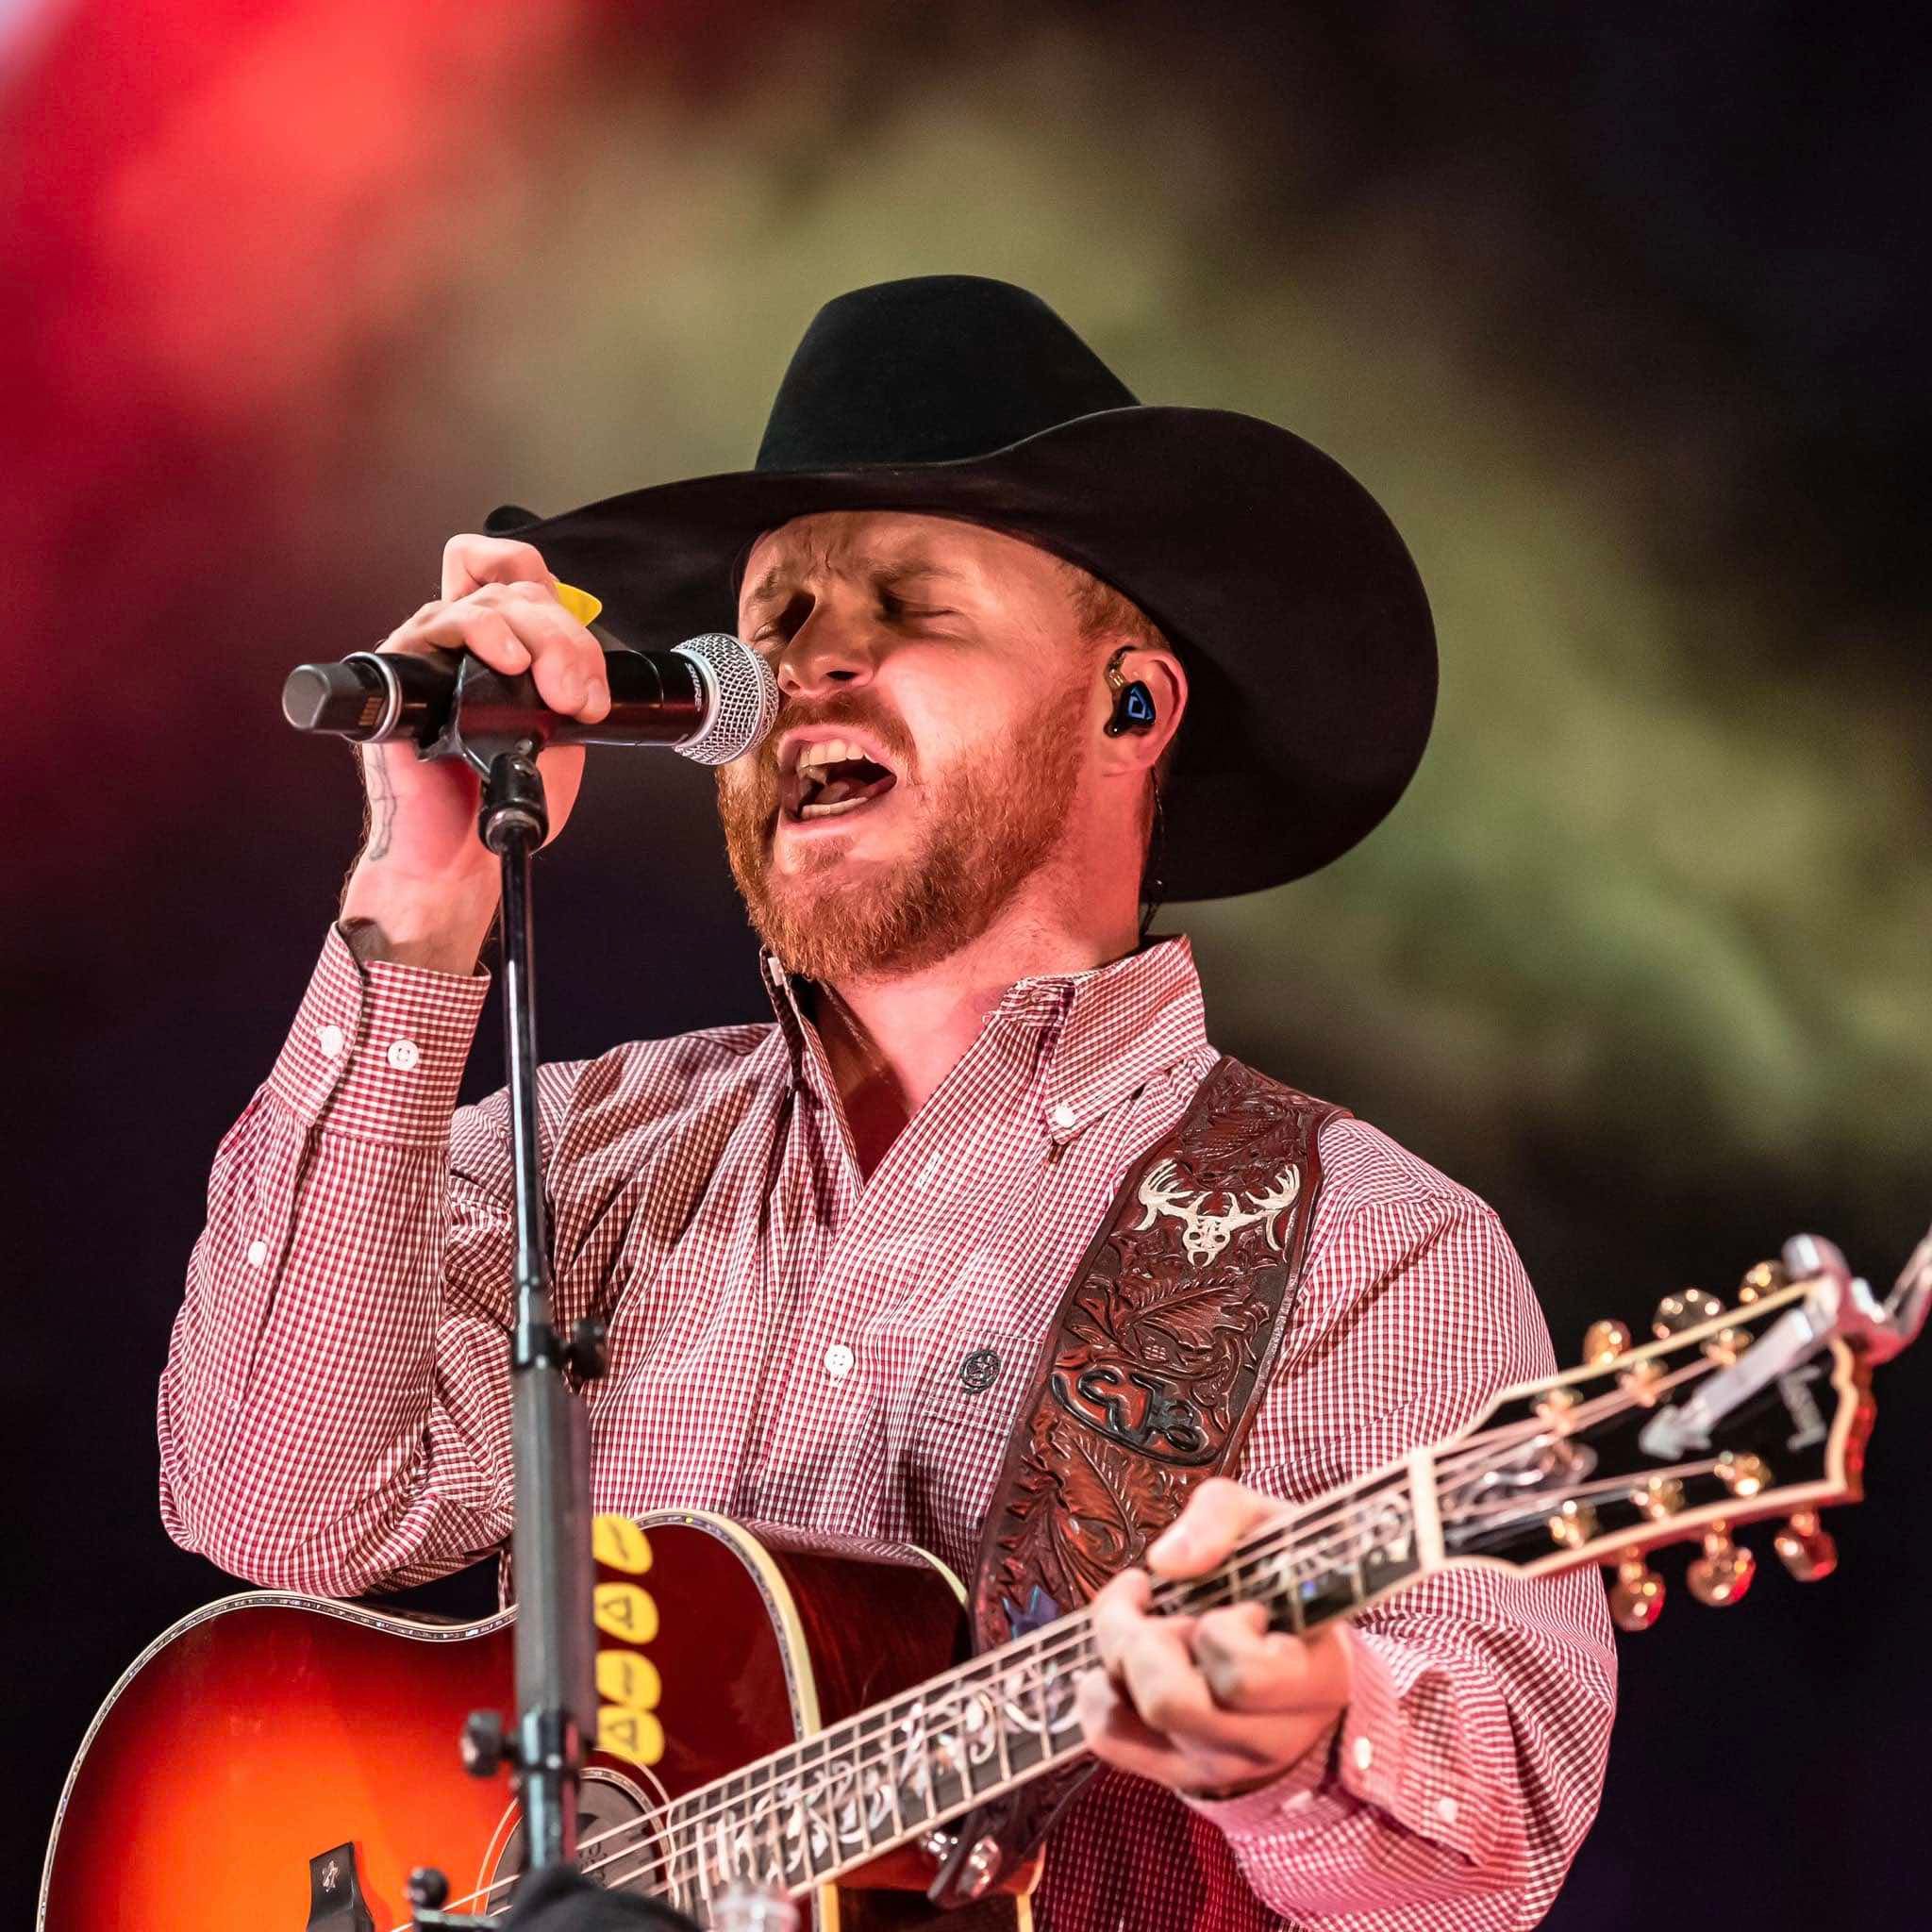 CMT Presents: A Cody Johnson Christmas - Date and Performances